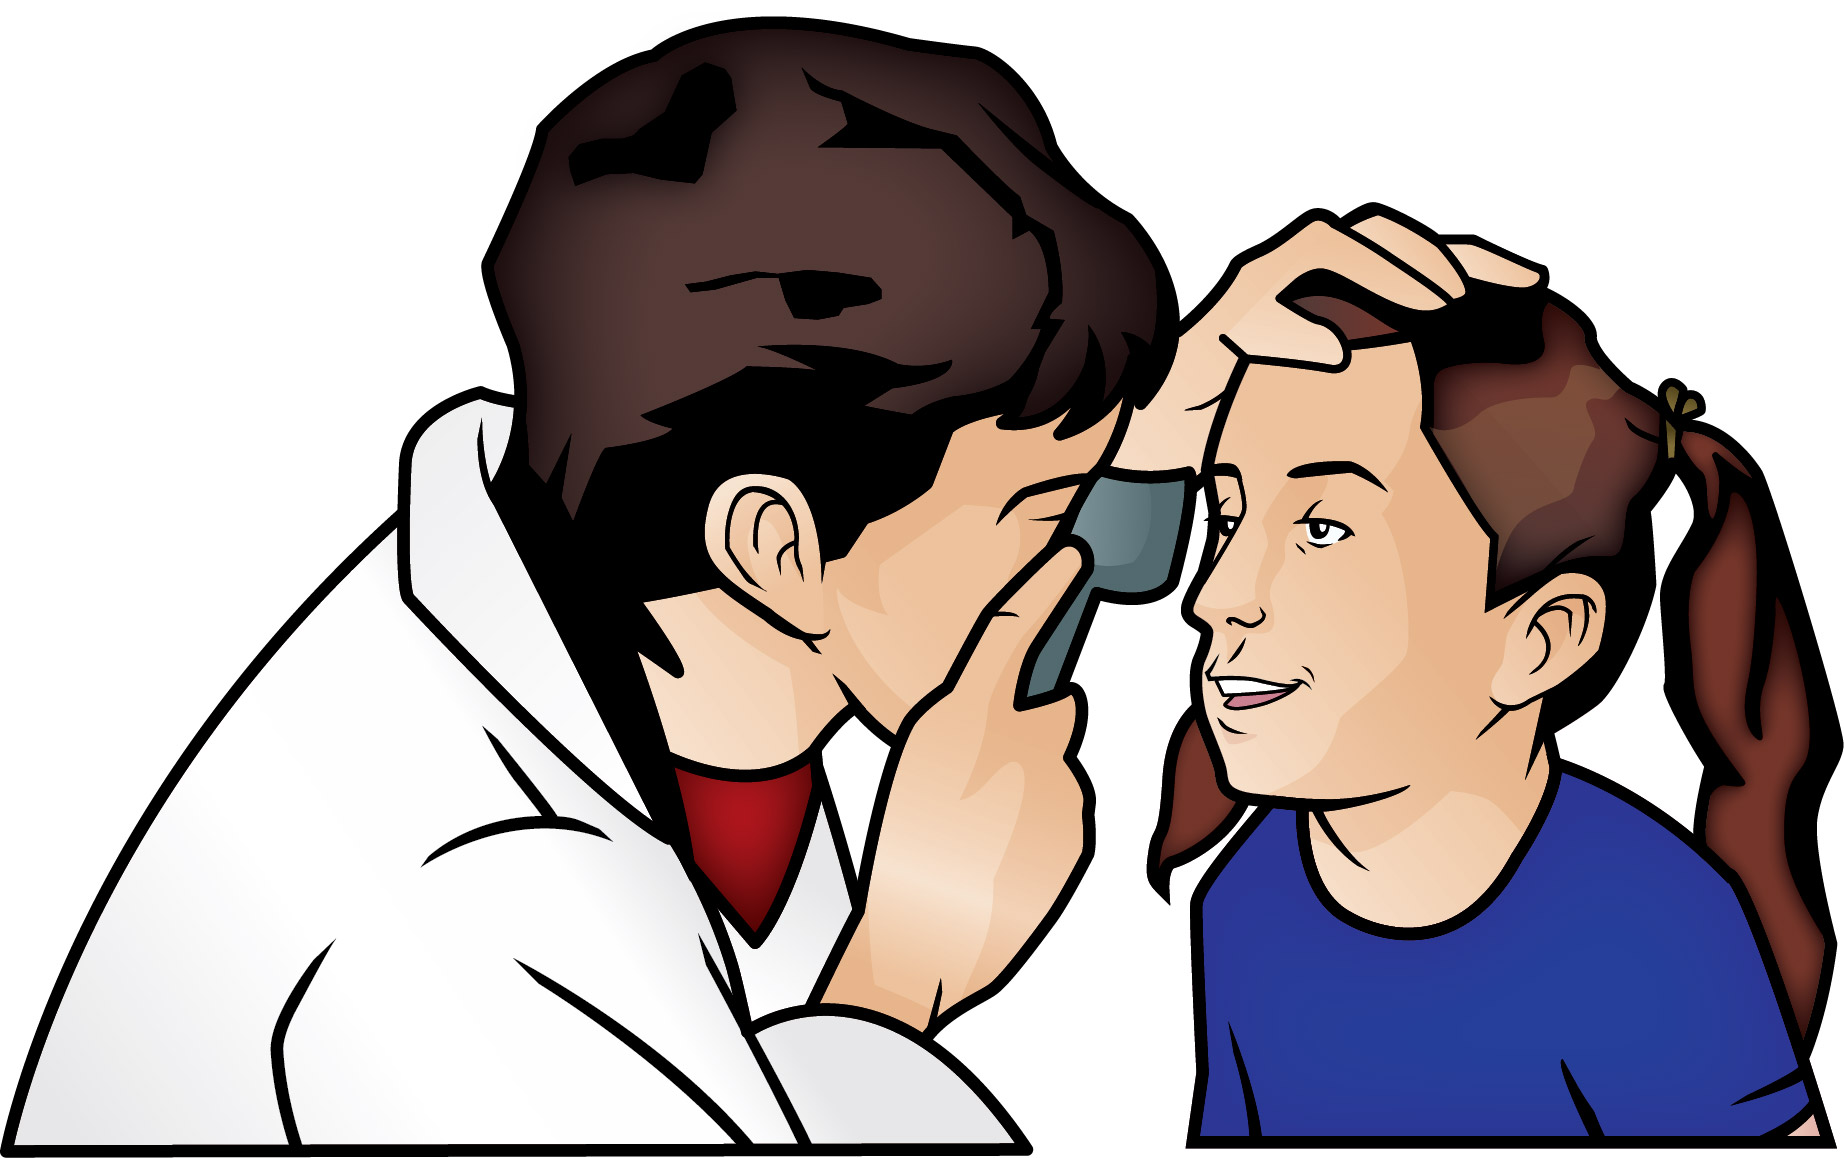 doctor clipart free download - photo #42